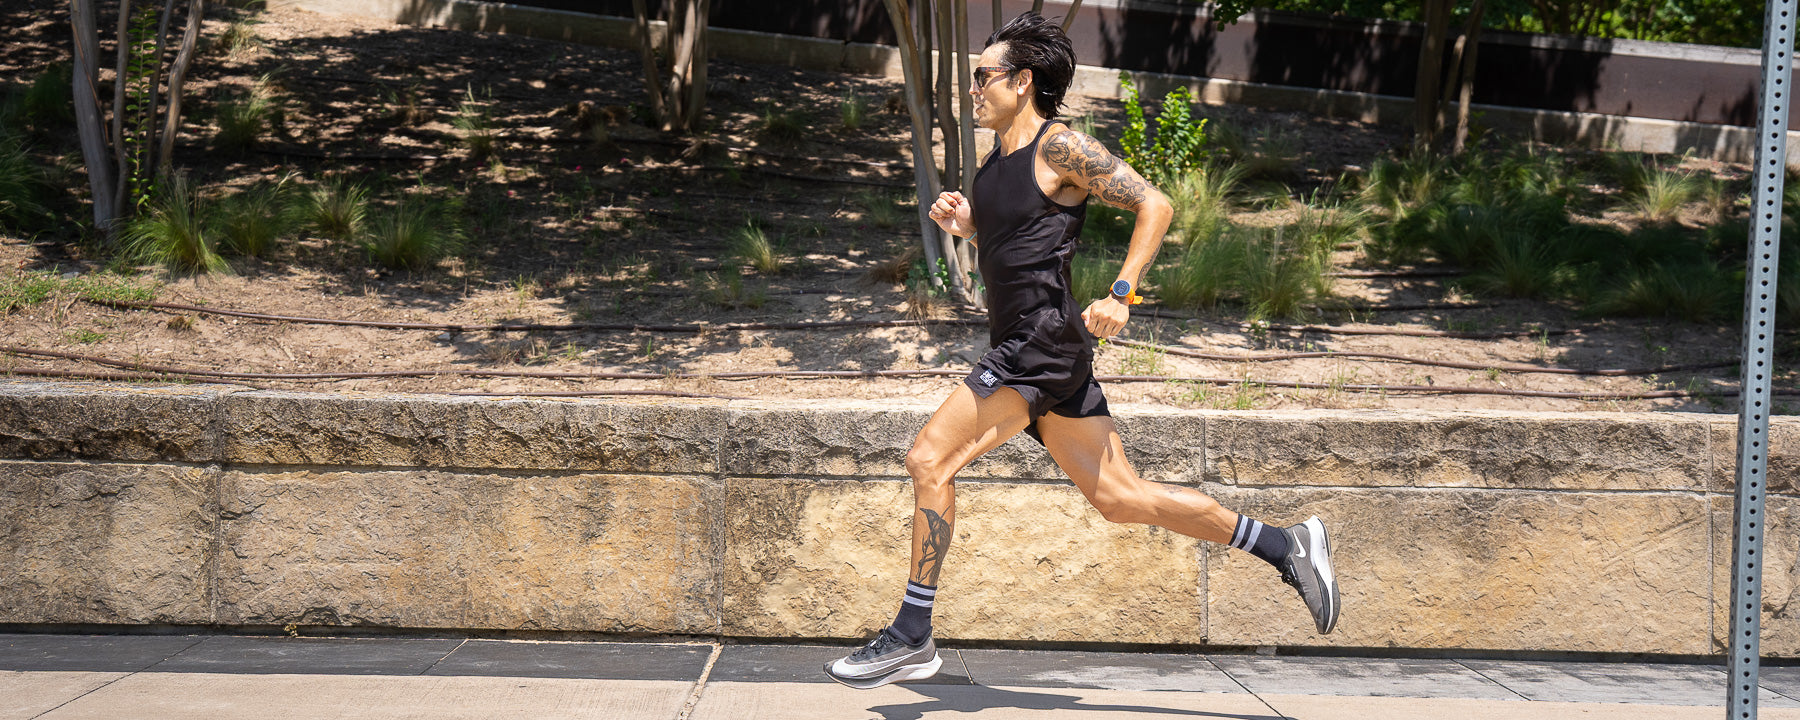 black running shorts and running top in austin